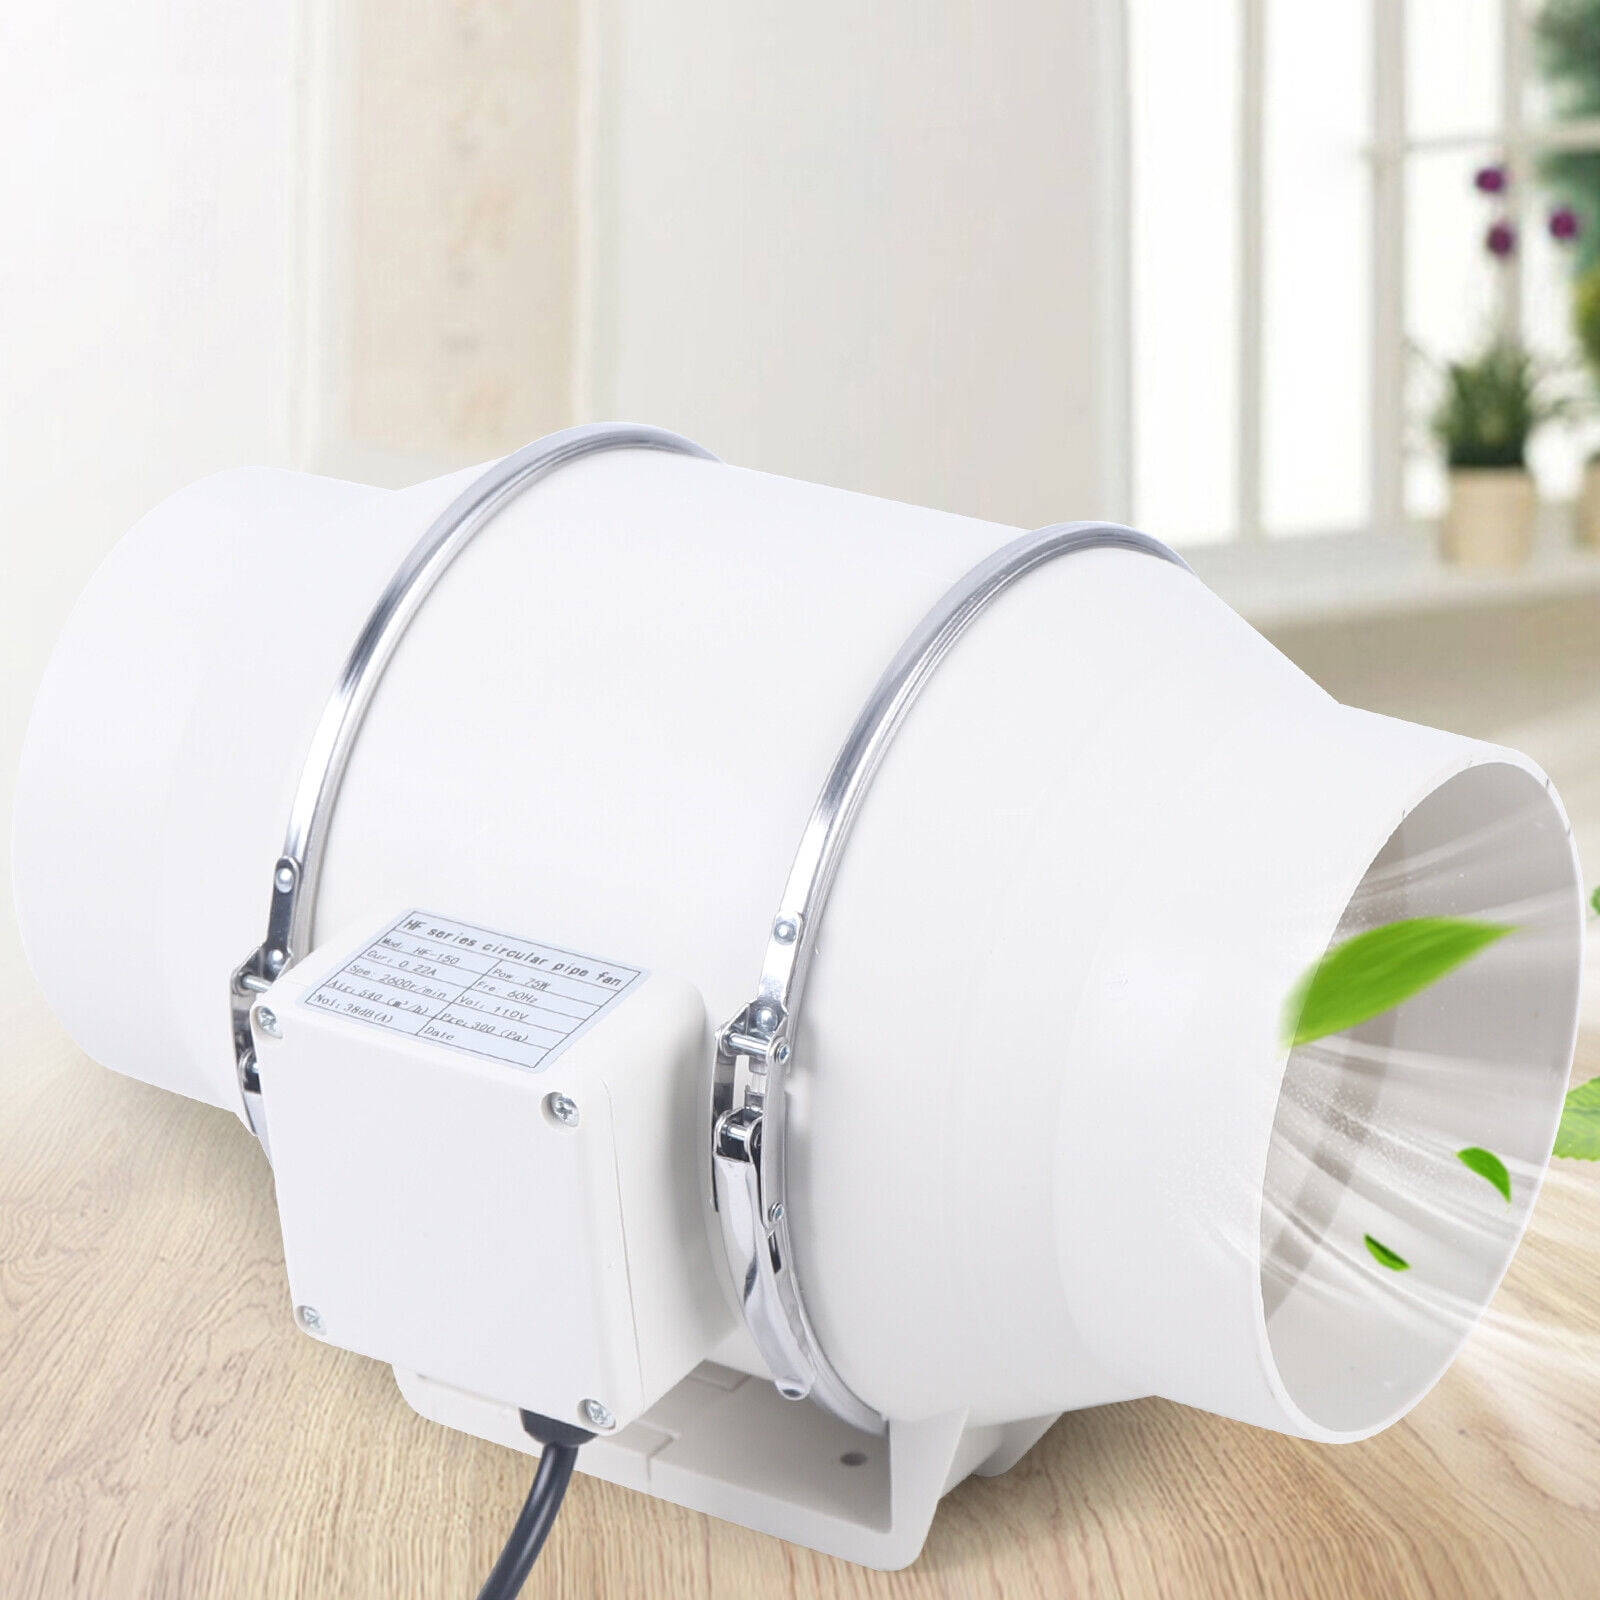 AC Infinity 79 Smart Outlet Controller from ACF Greenhouses